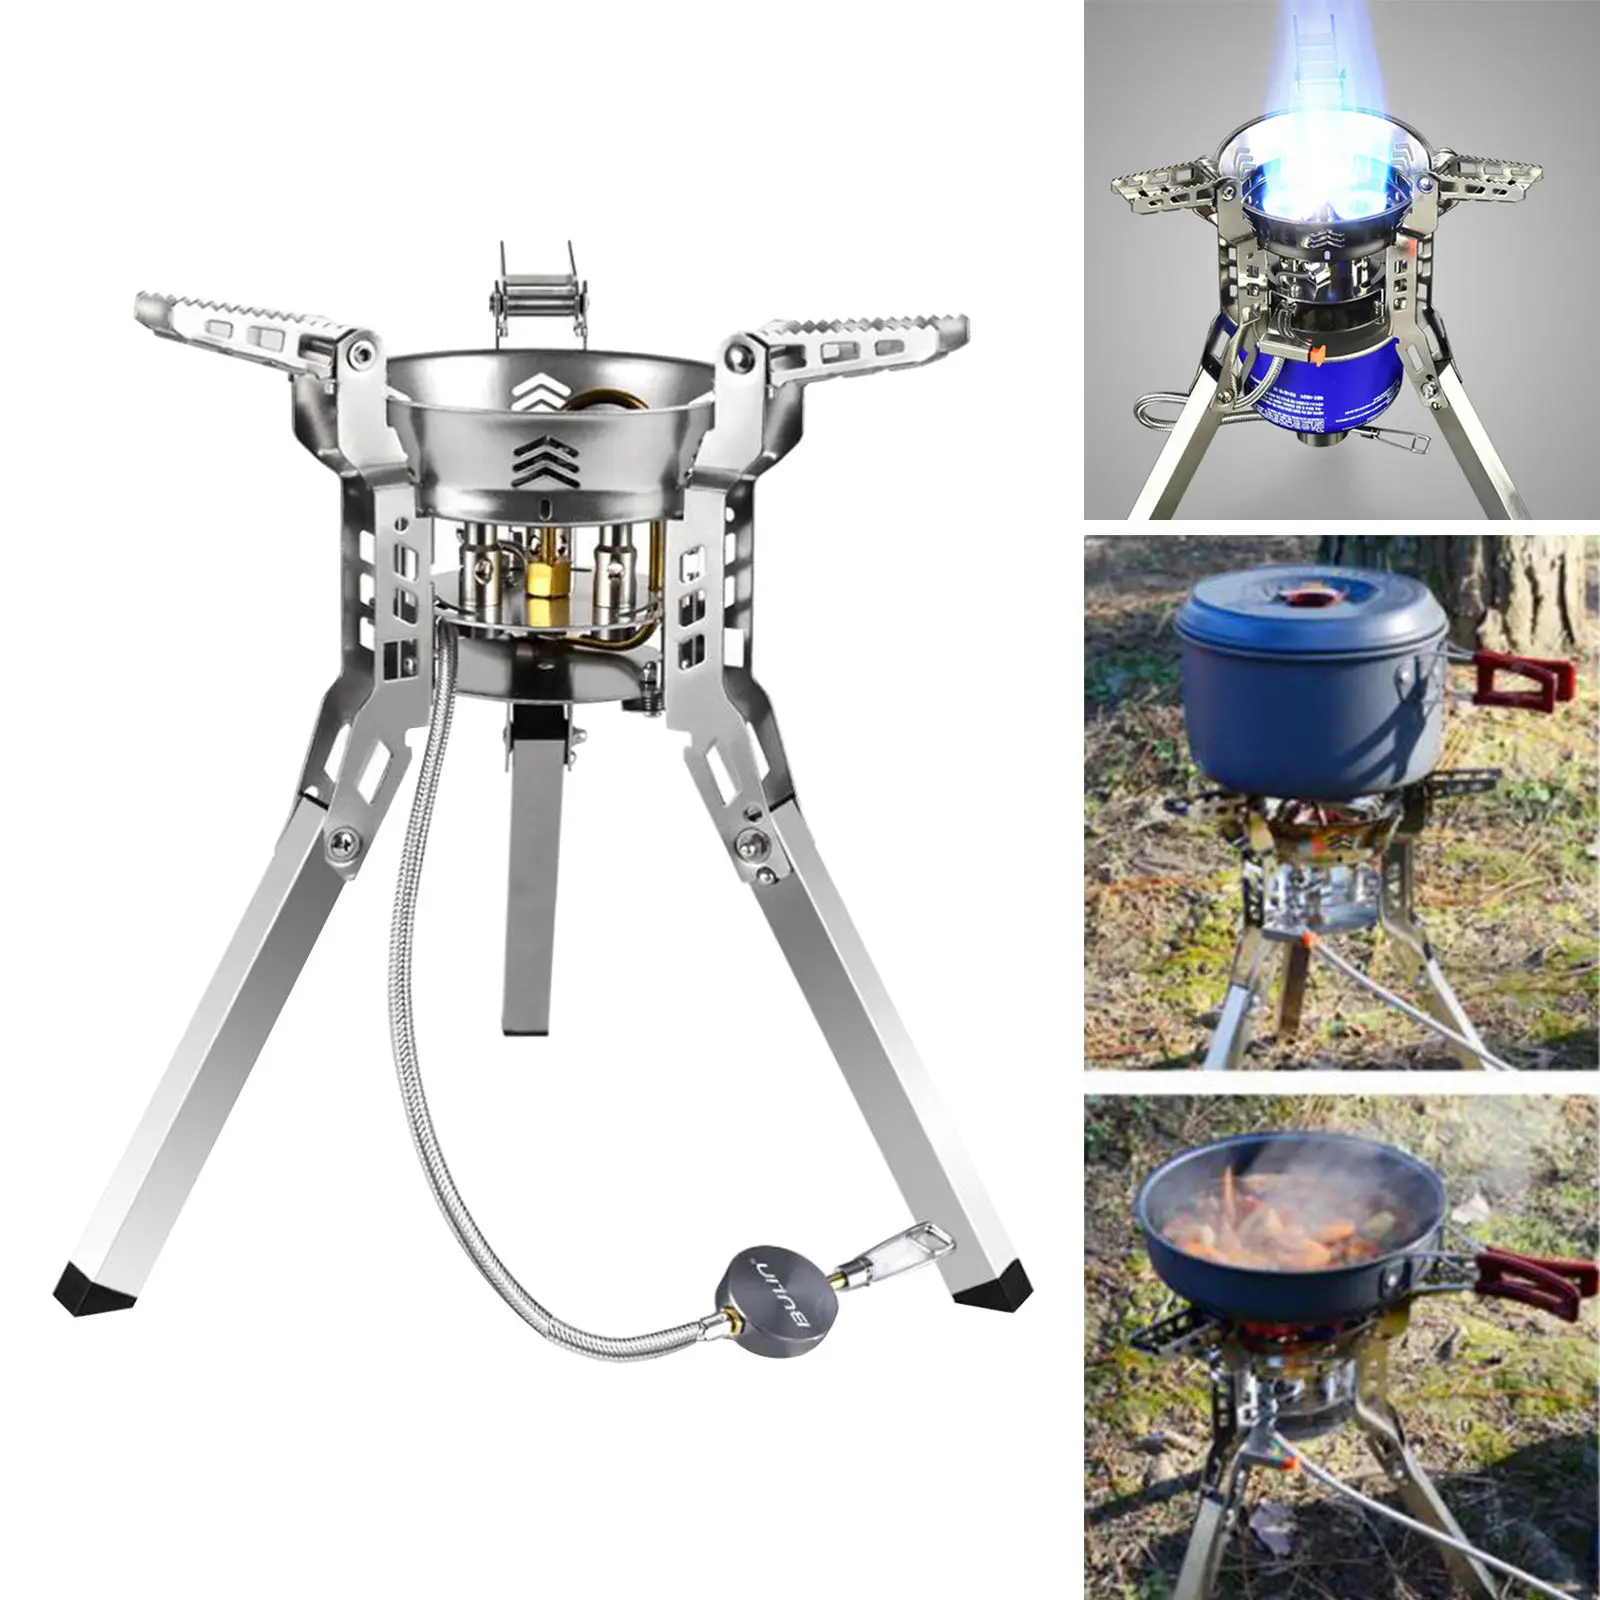 6800W Gas Stove Camping Burner Strong Fire Outdoor Camp Cooker for Outdoor Camping Hiking Picnic Fishing Gear Cooker